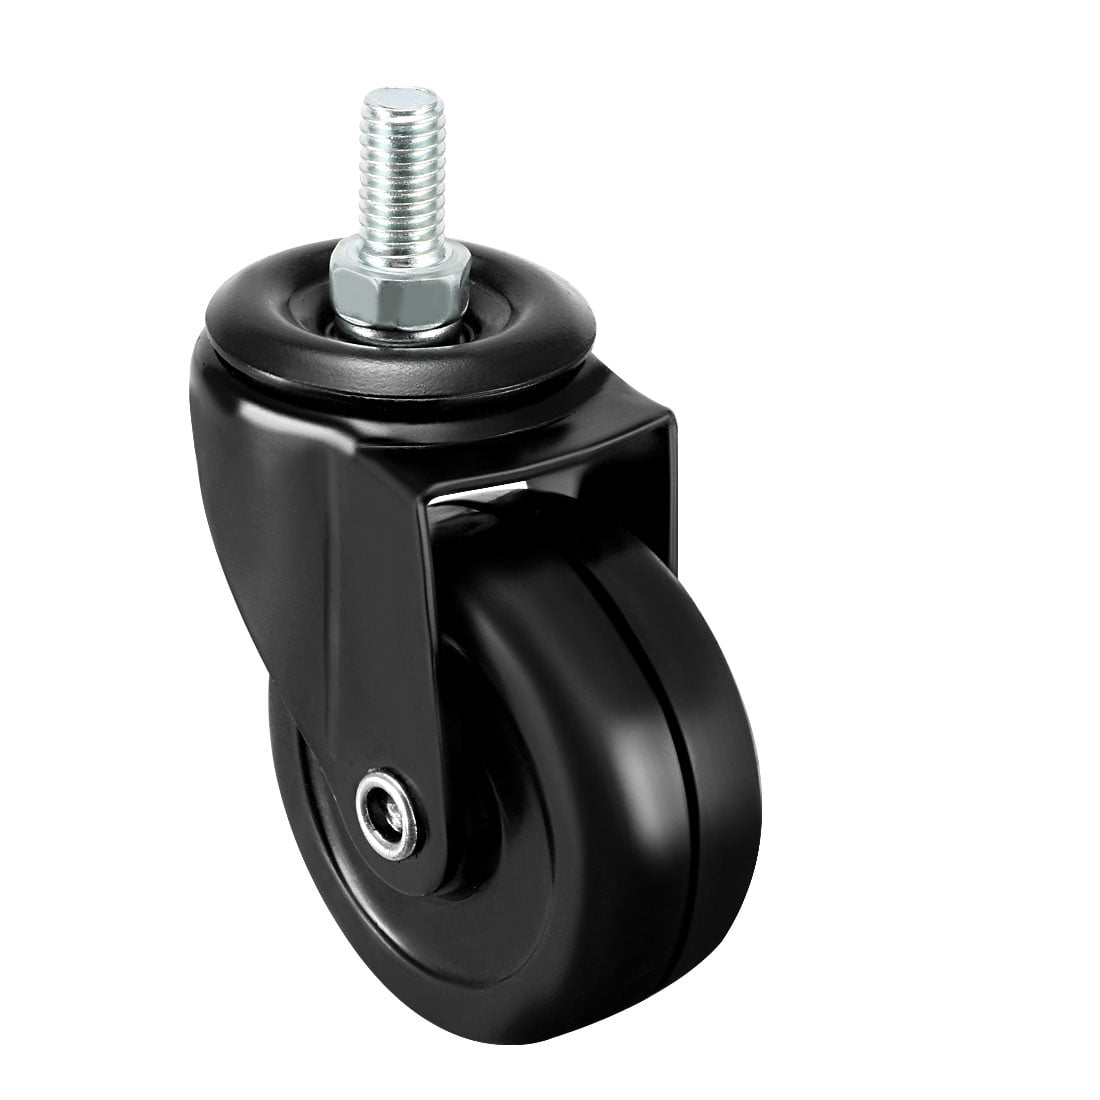 2-inch Solid Rubber Swivel castors Wheels with Threaded Wheels M8 x 15 mm 360 Degrees Black Capacity 44 lb Each 4 Pieces 